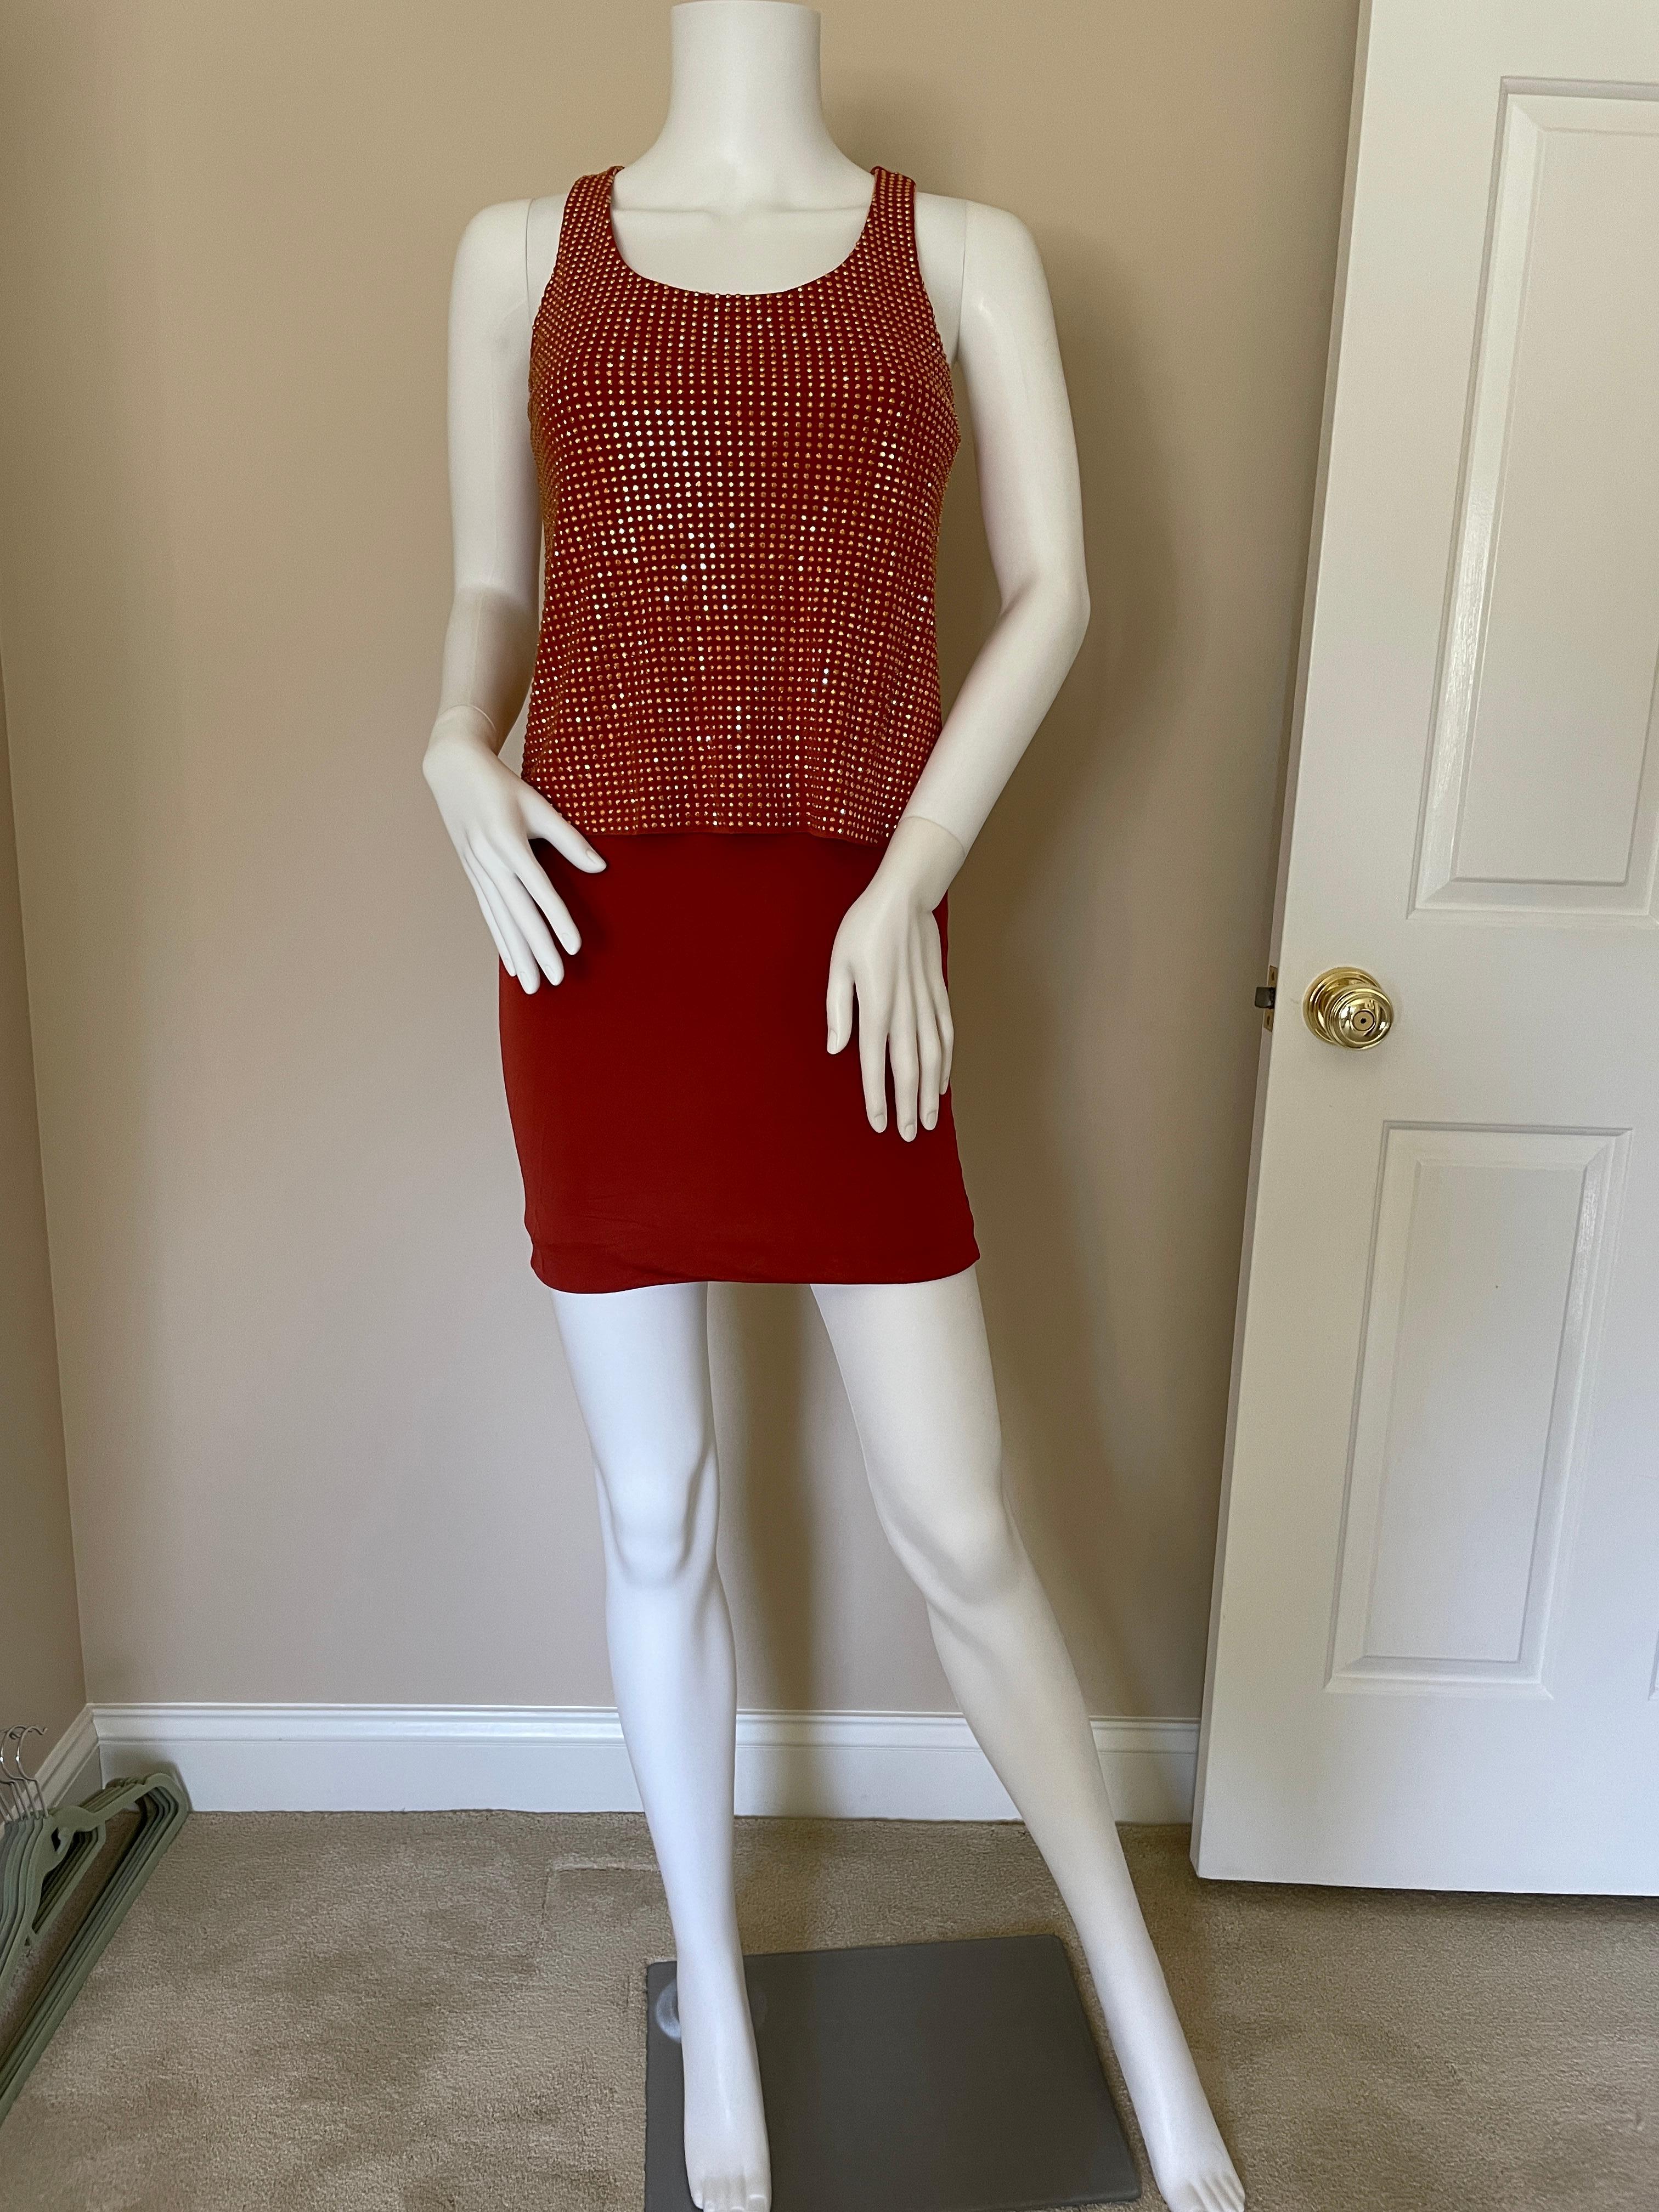 Gucci embellished slinky mini dress! Side zip, size IT 40 with stretch. Shiny sparkle accents of metal type Swarovski crystals. Very flattering, perfect for Summer nights. The color is like a copper, orange, red, and gold blend. It's sleek, sexy,